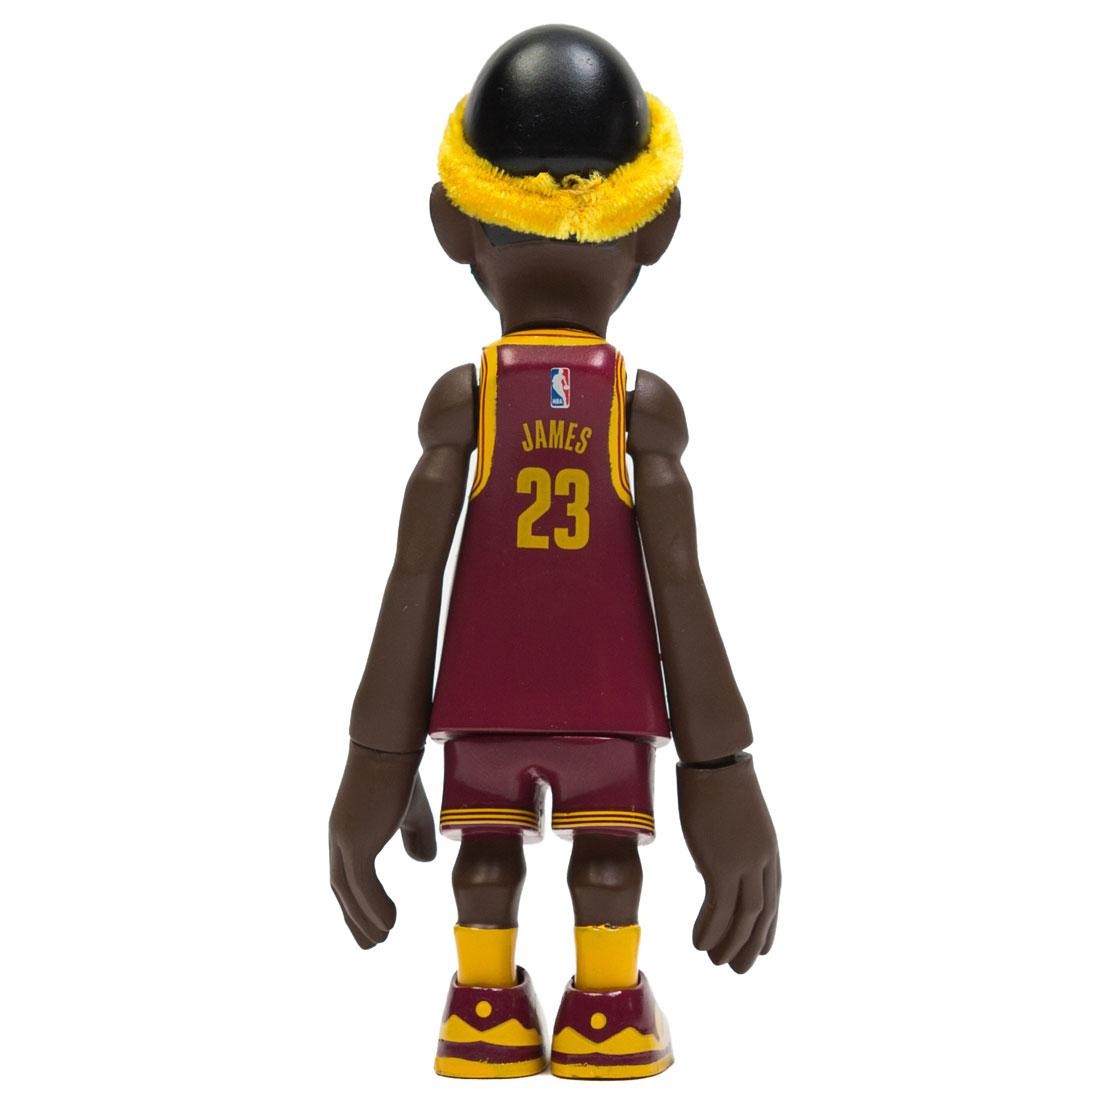 MINDstyle x Coolrain NBA Cleveland Cavaliers Lebron James Arena 